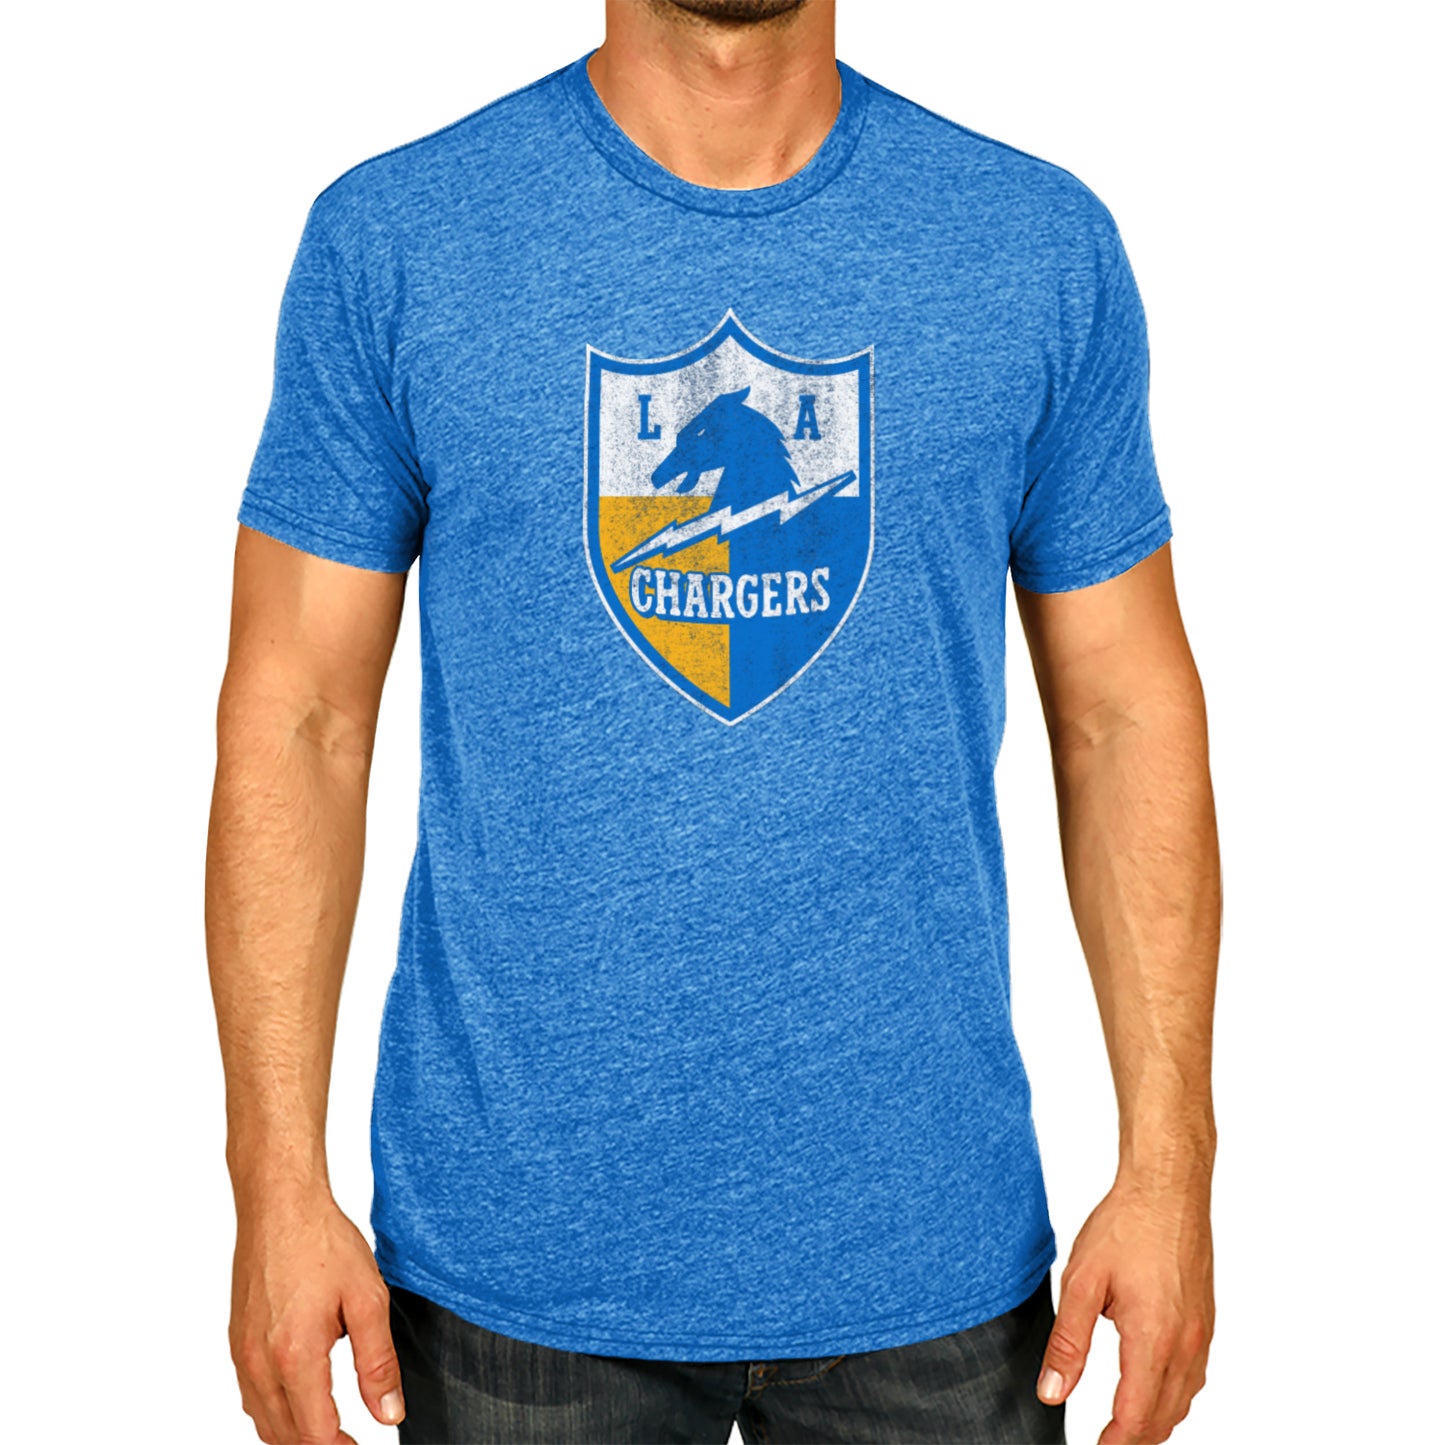 Los Angeles Chargers NFL Modern Throwback T-shirt - Light Blue